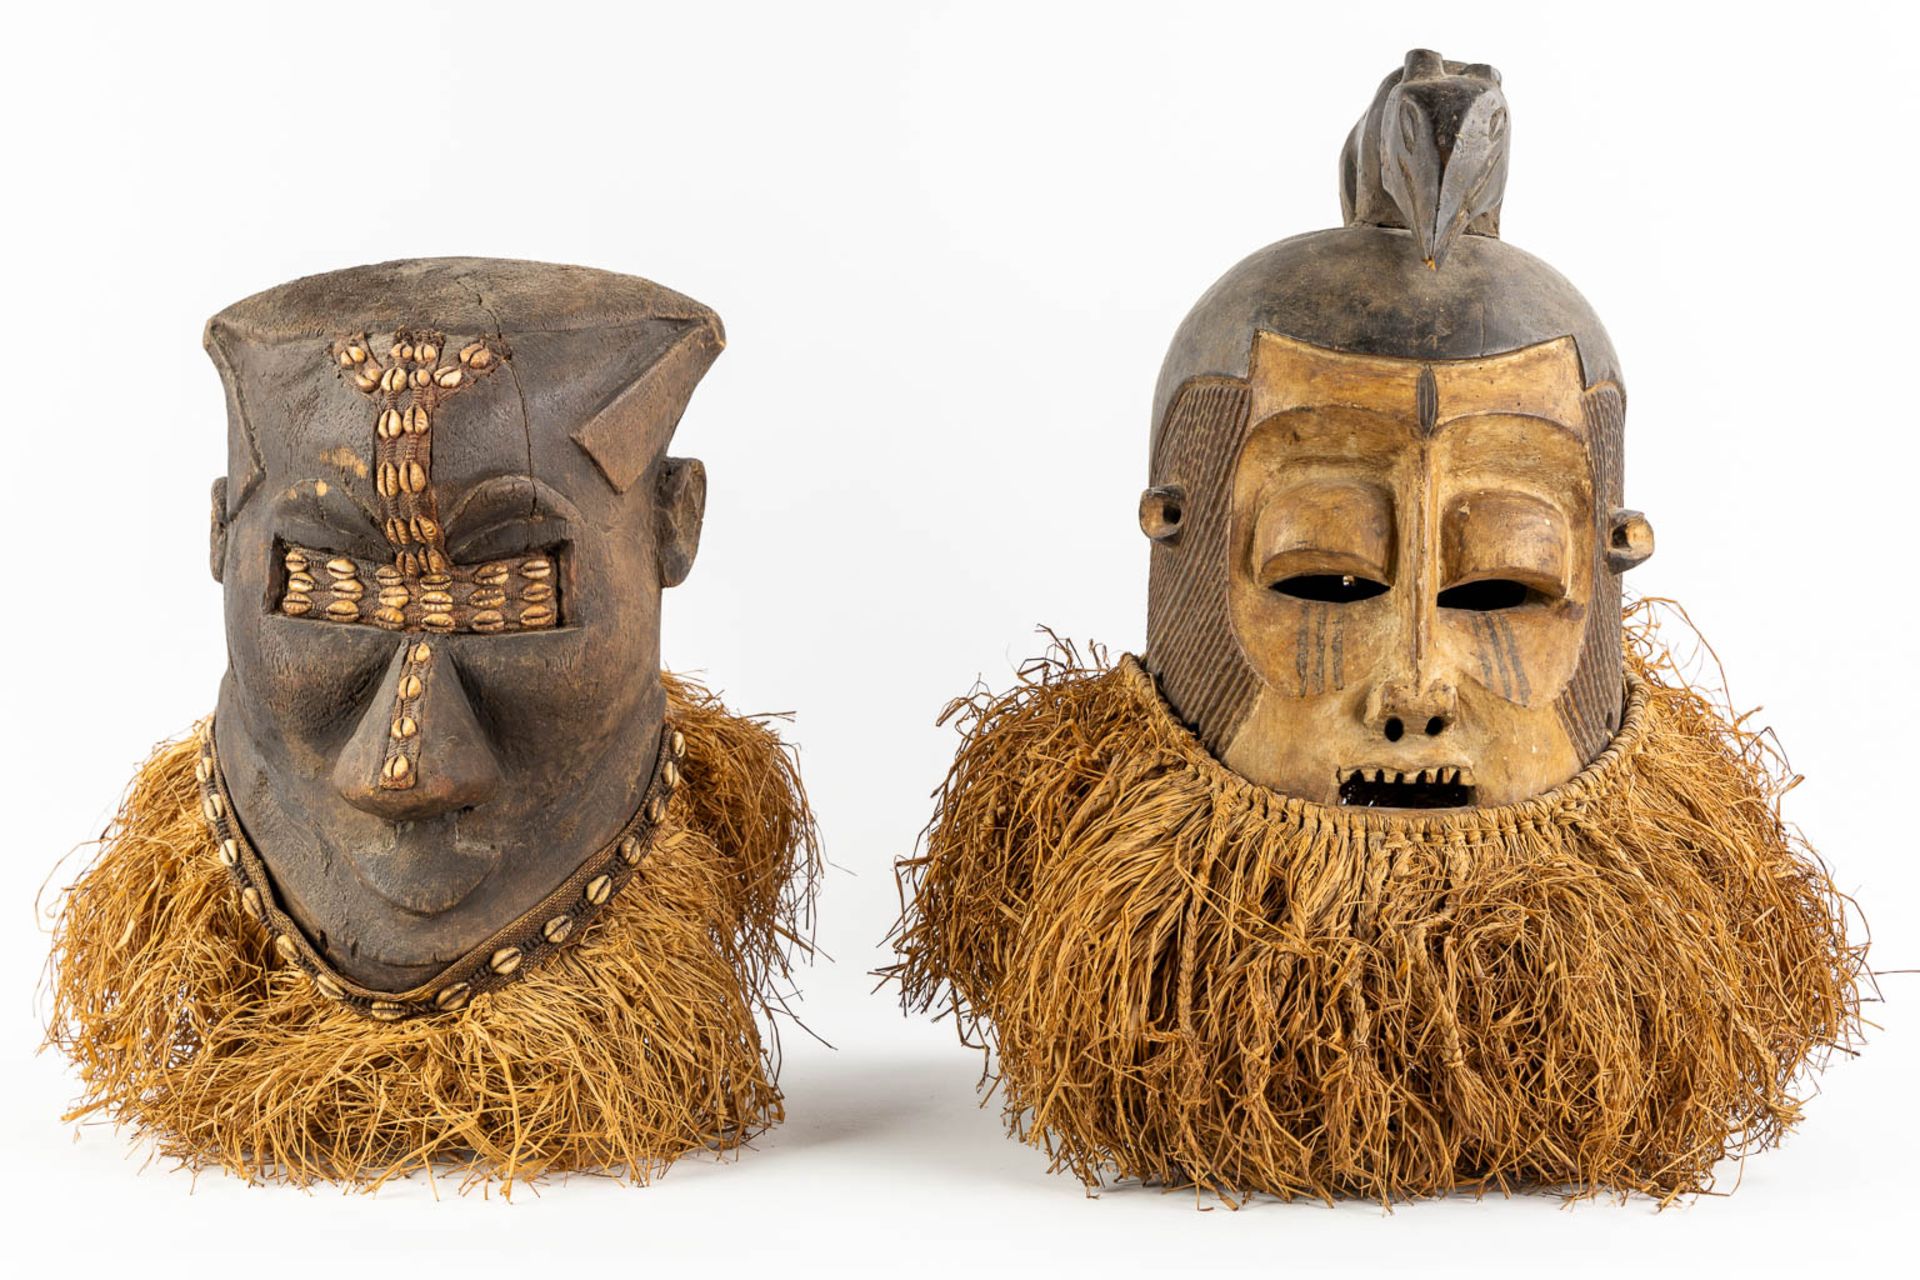 Suku Tribe, two decorative African masks. Wood and straw. (L:44 x W:40 x H:48 cm) - Image 3 of 11